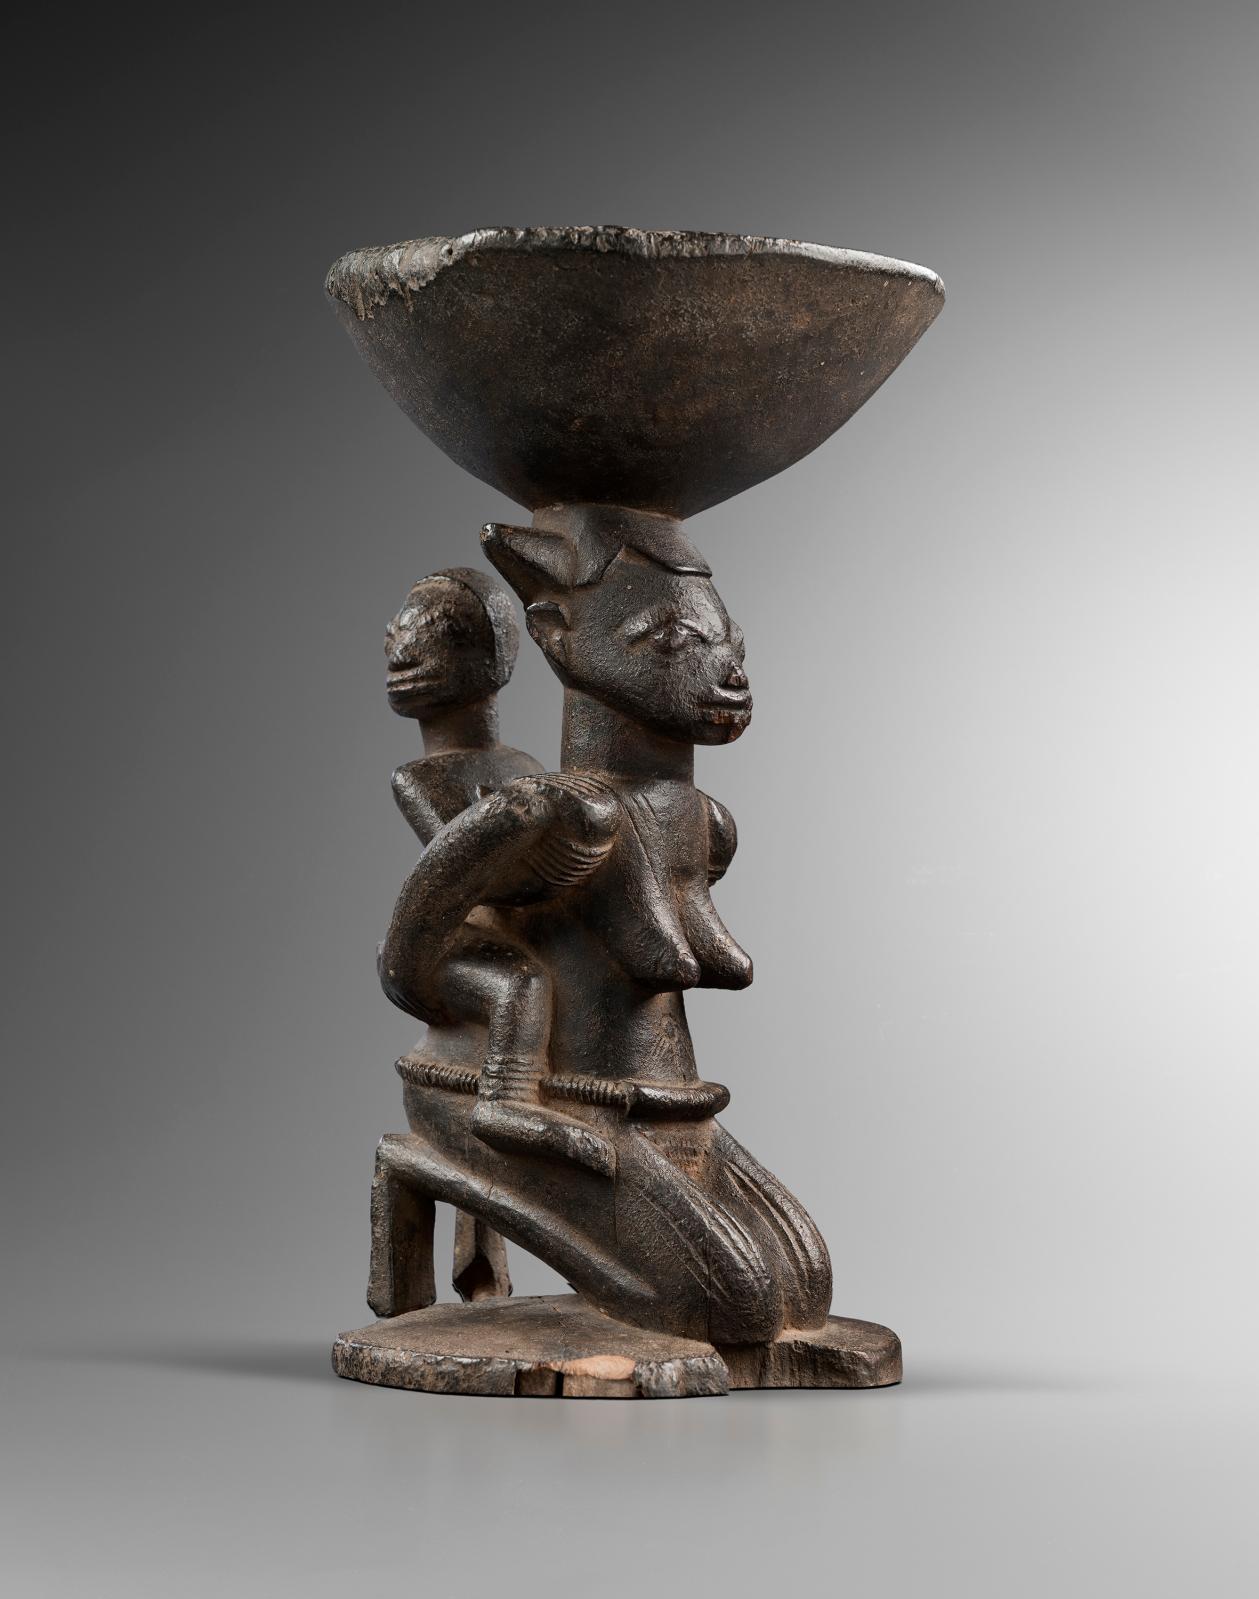 Divination cup (Agere ifa), 19th century, wood, h. 25 cm.Serge Schoffel gallery, Brussels